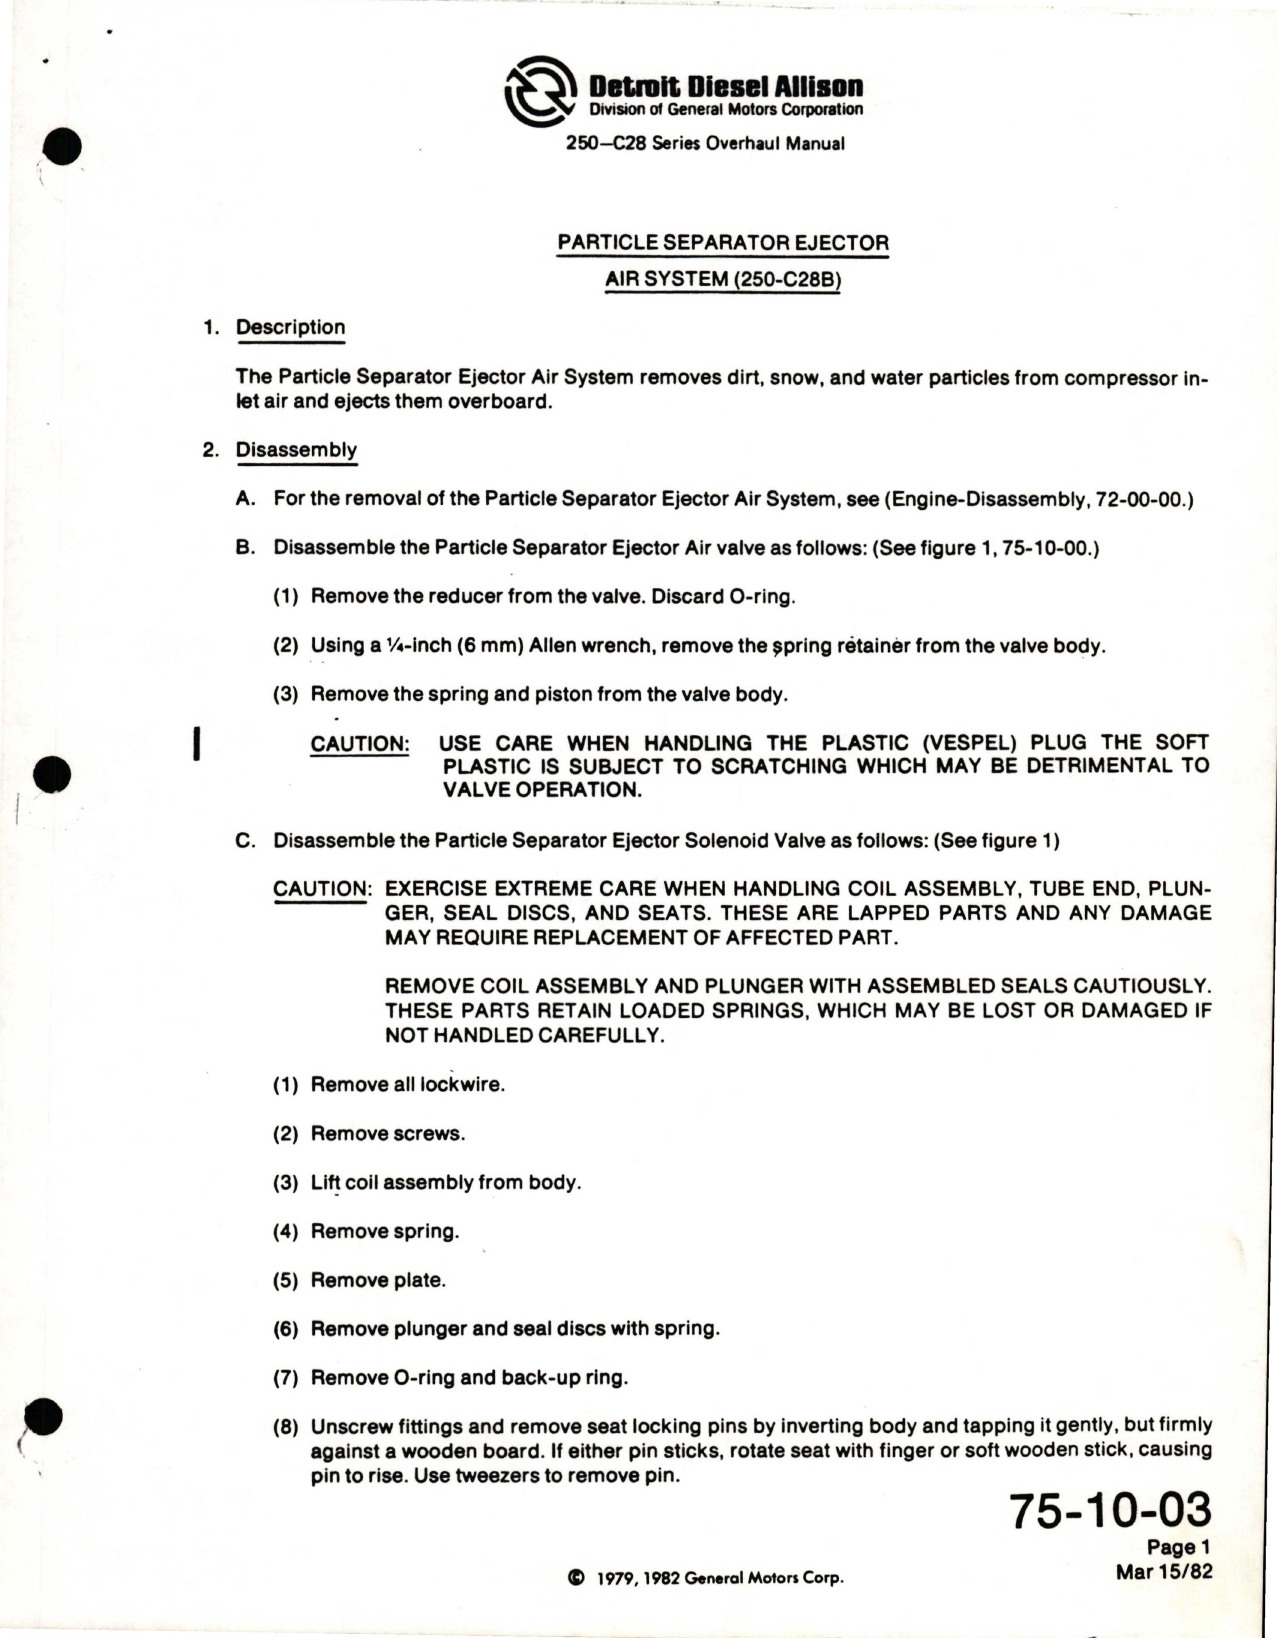 Sample page 1 from AirCorps Library document: Overhaul Manual for Particle Separator Ejector Air System - 250-C28 Series 